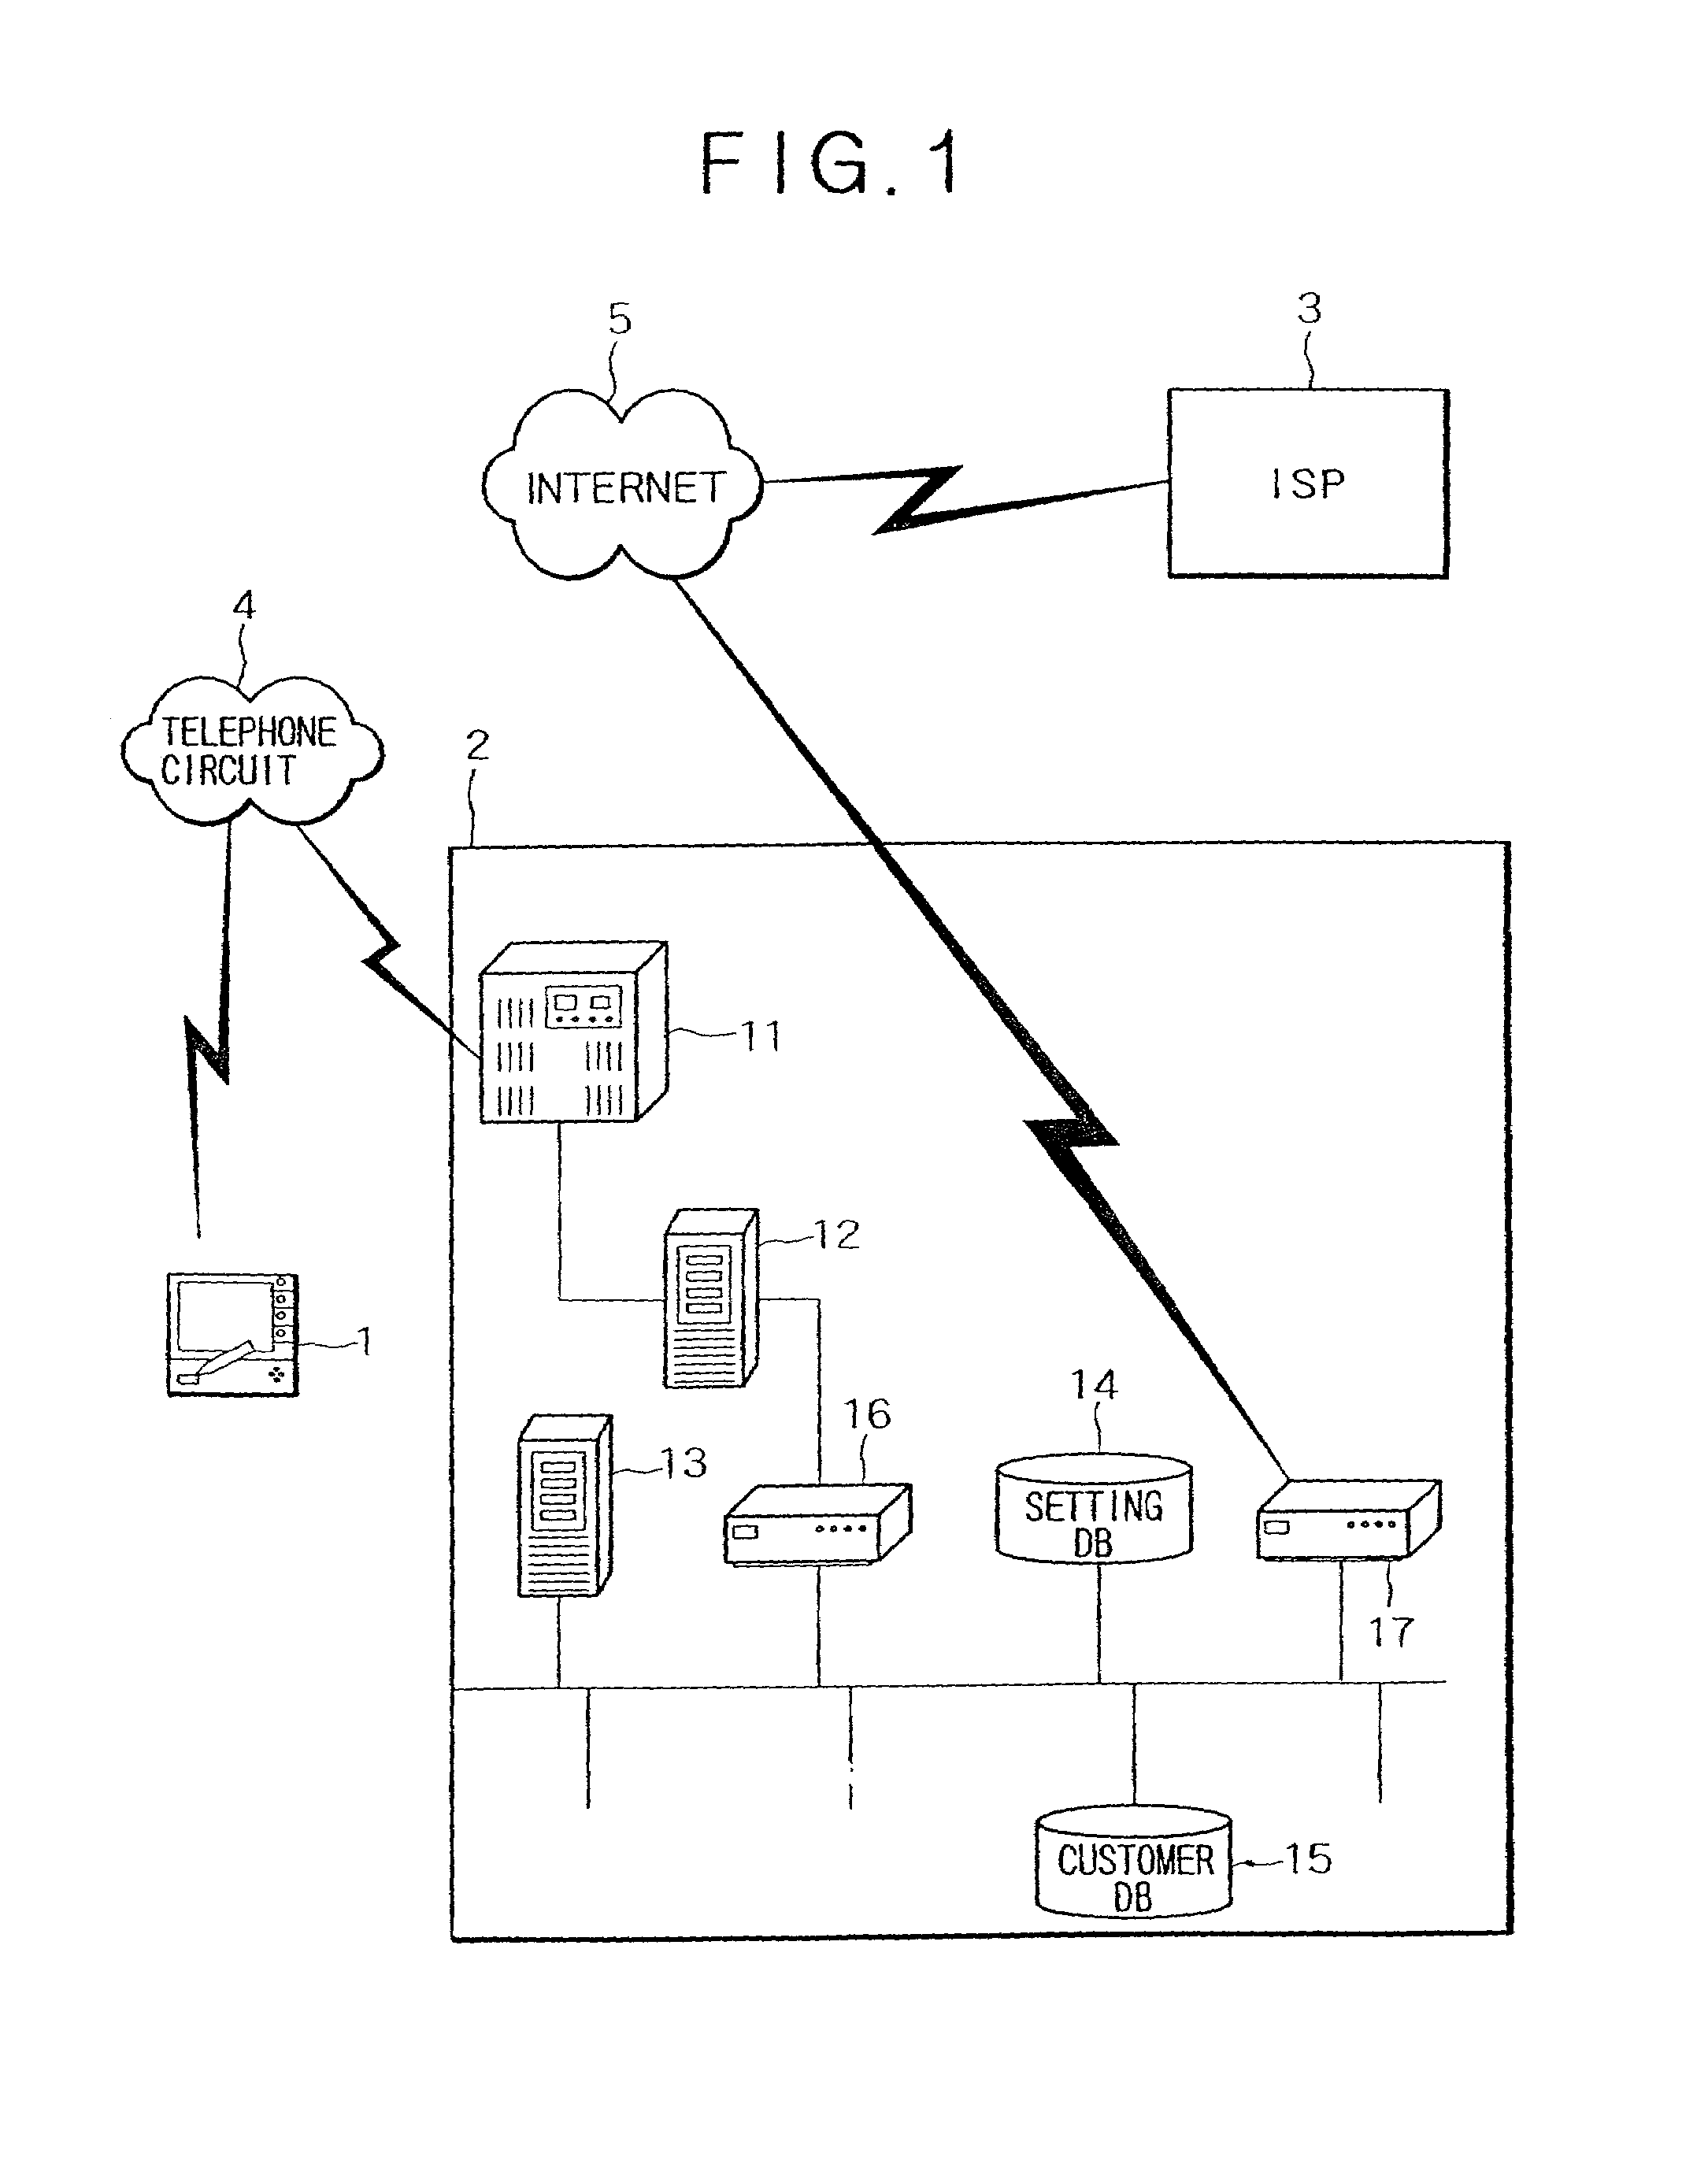 Method for registering a terminal with an internet service provider